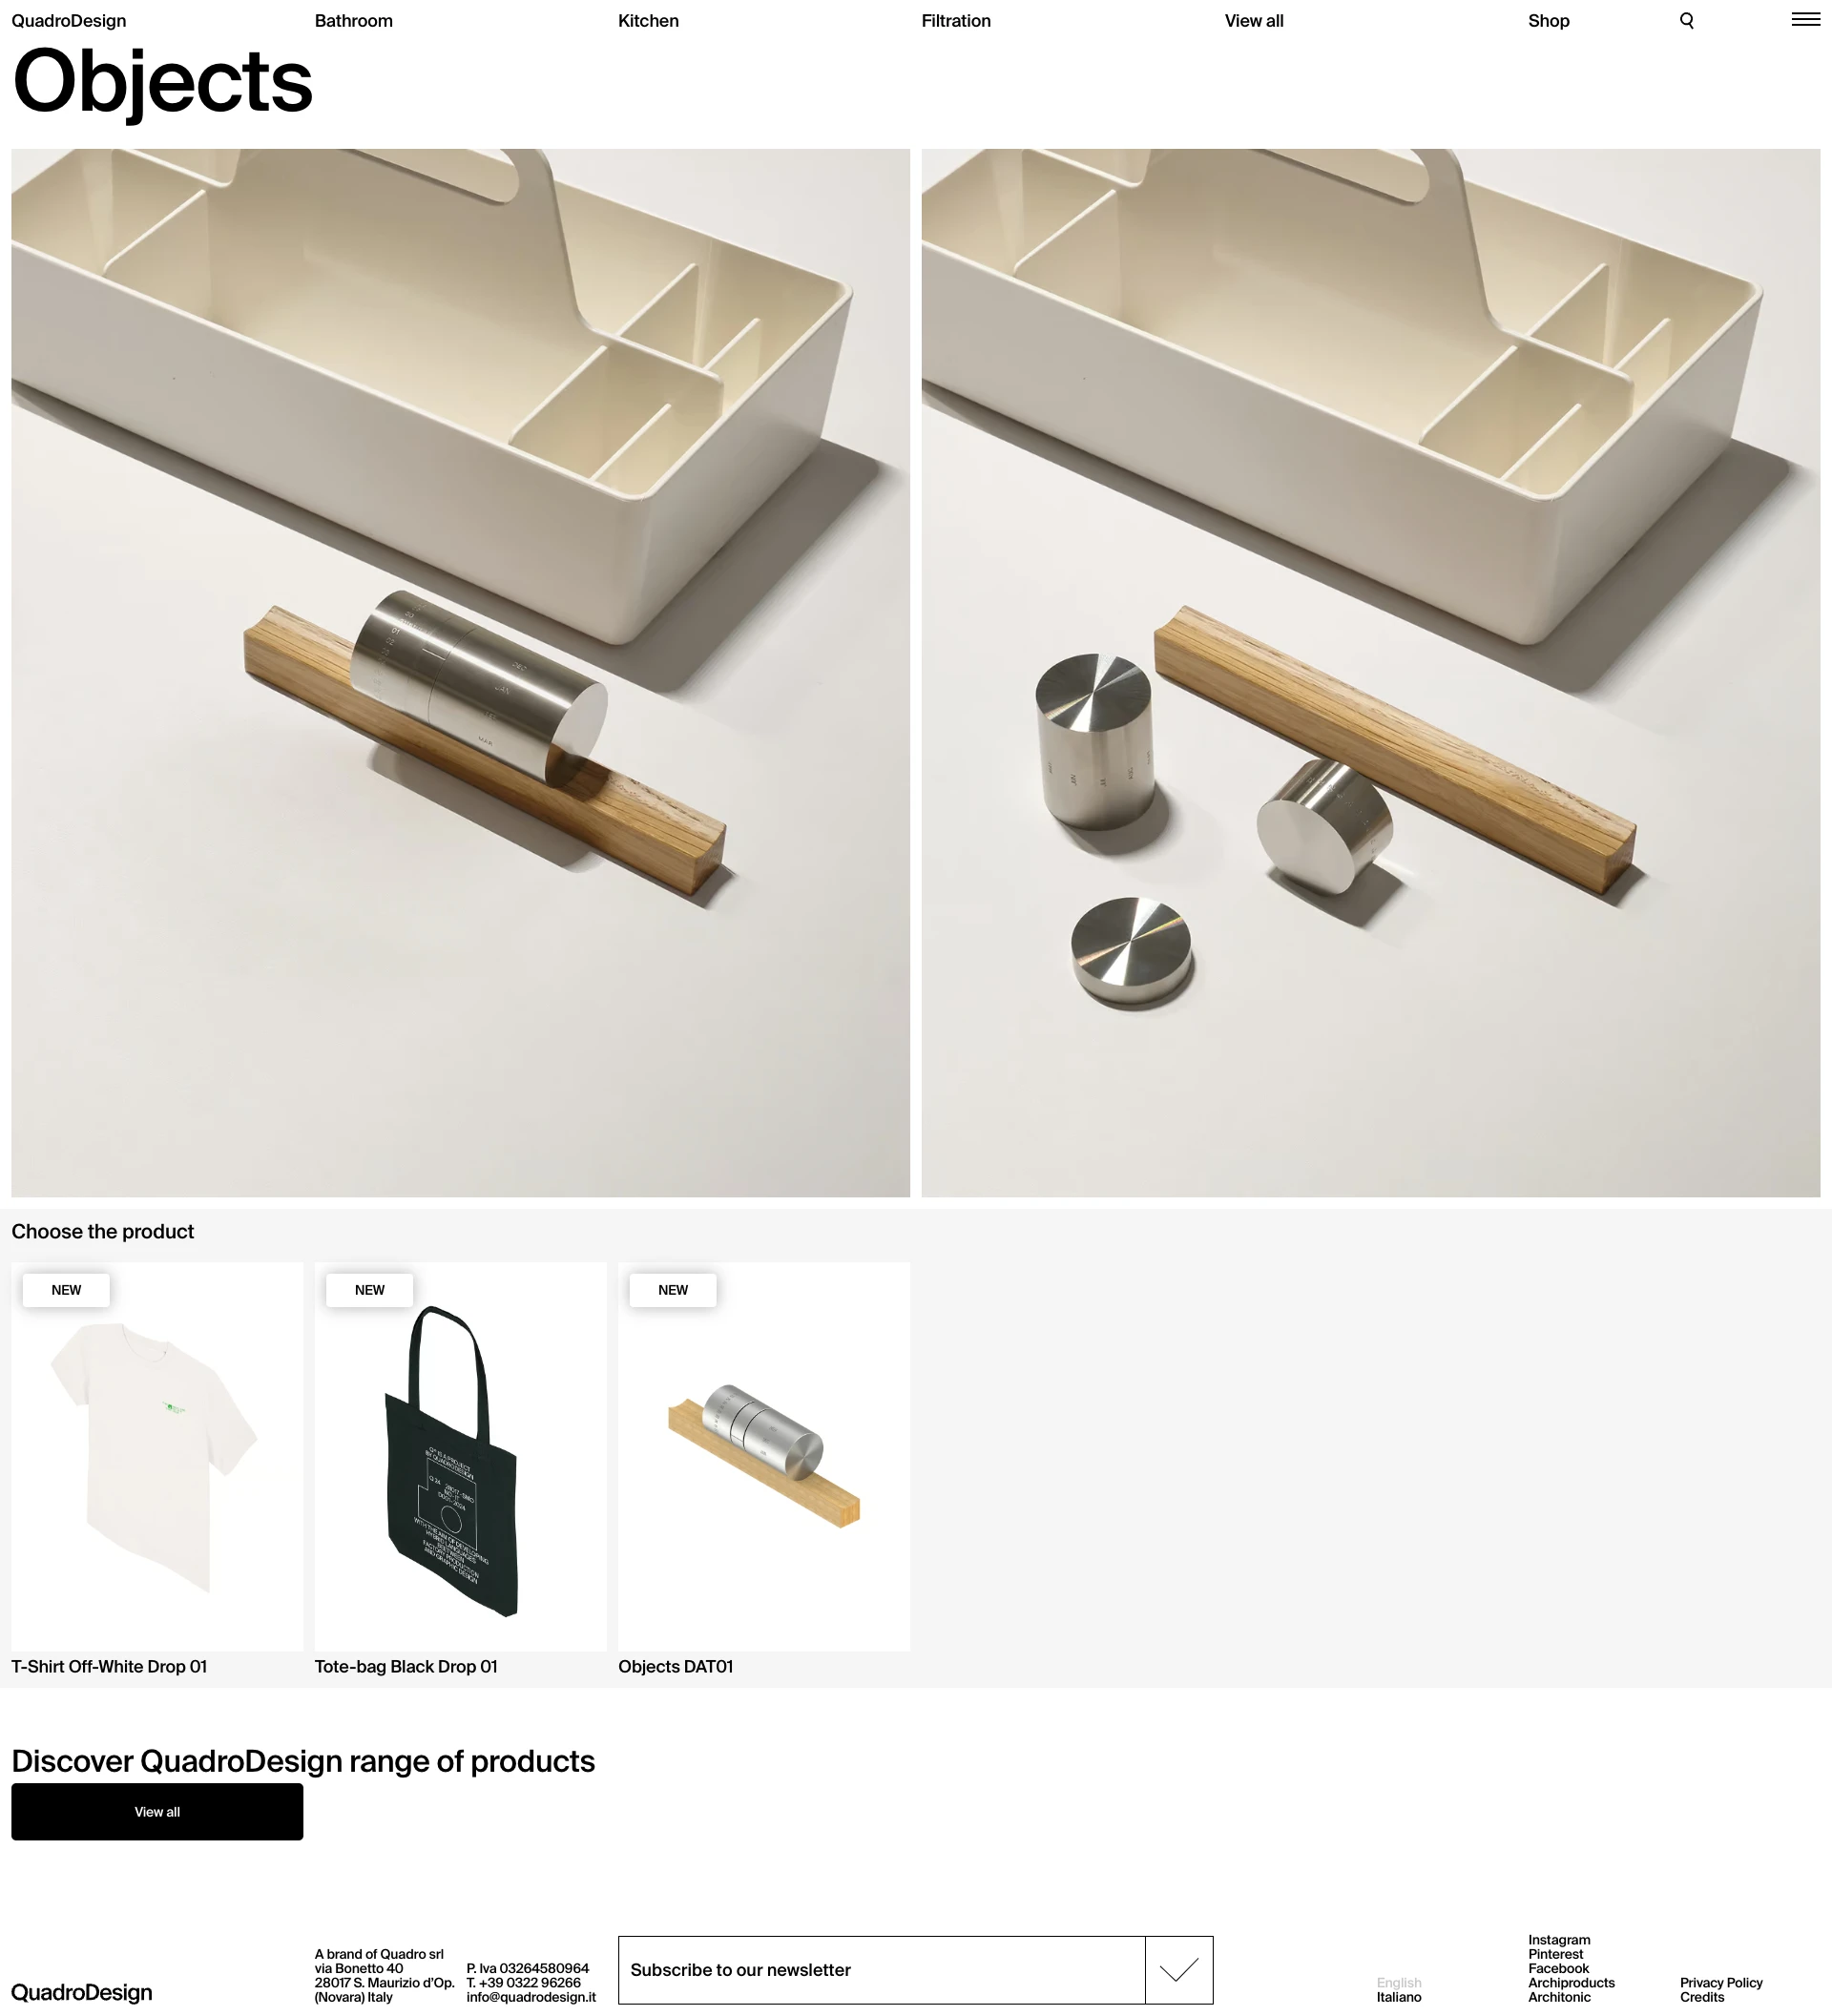 QuadroDesign Landing Page Example: QuadroDesign creates timeless design faucets and accessories for bathrooms and kitchens, embodying sustainability and the values of Made in Italy. Find out more.